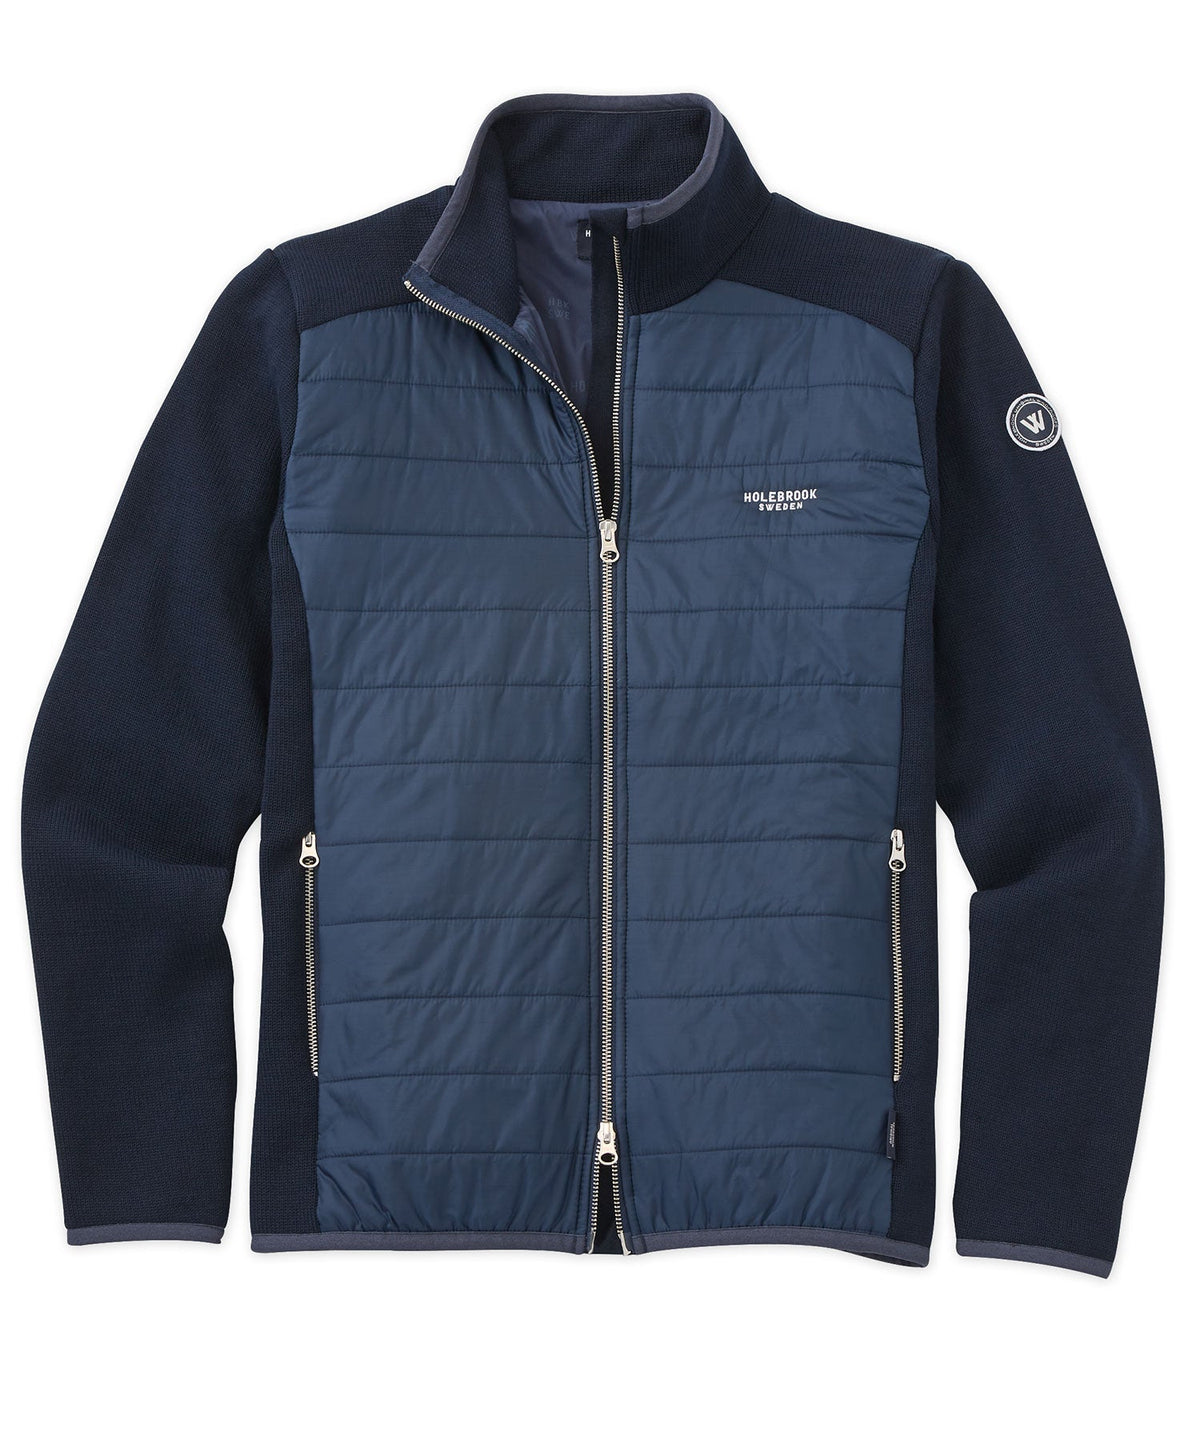 Holebrook Sweden Zip-Front Quilted Windproof Jacket, Big & Tall